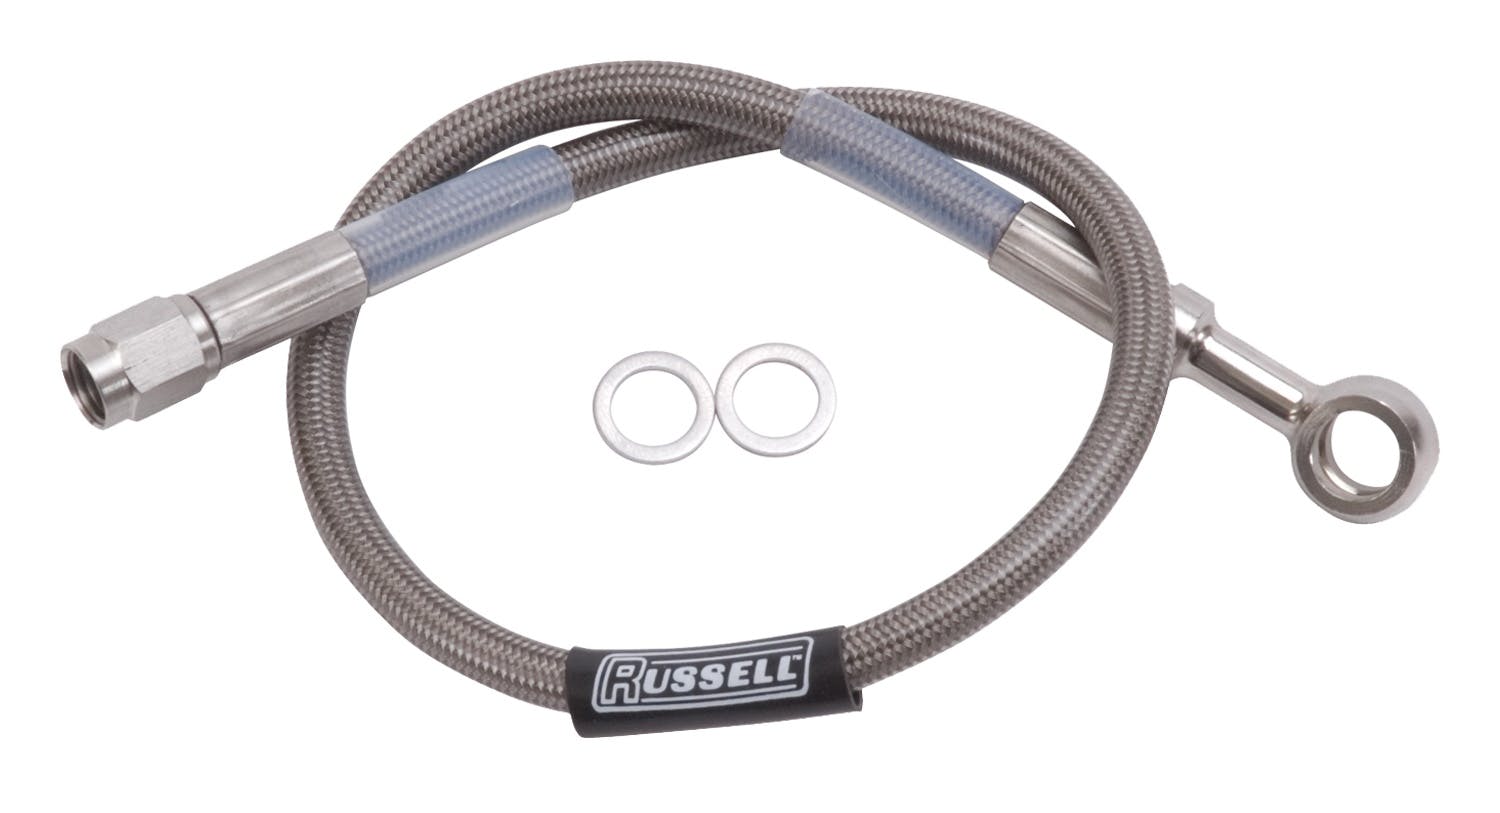 Russell 657242 Brake Line Assembly  16in 10mm -3/8in Banjo To Straight #3   Endura / Stree